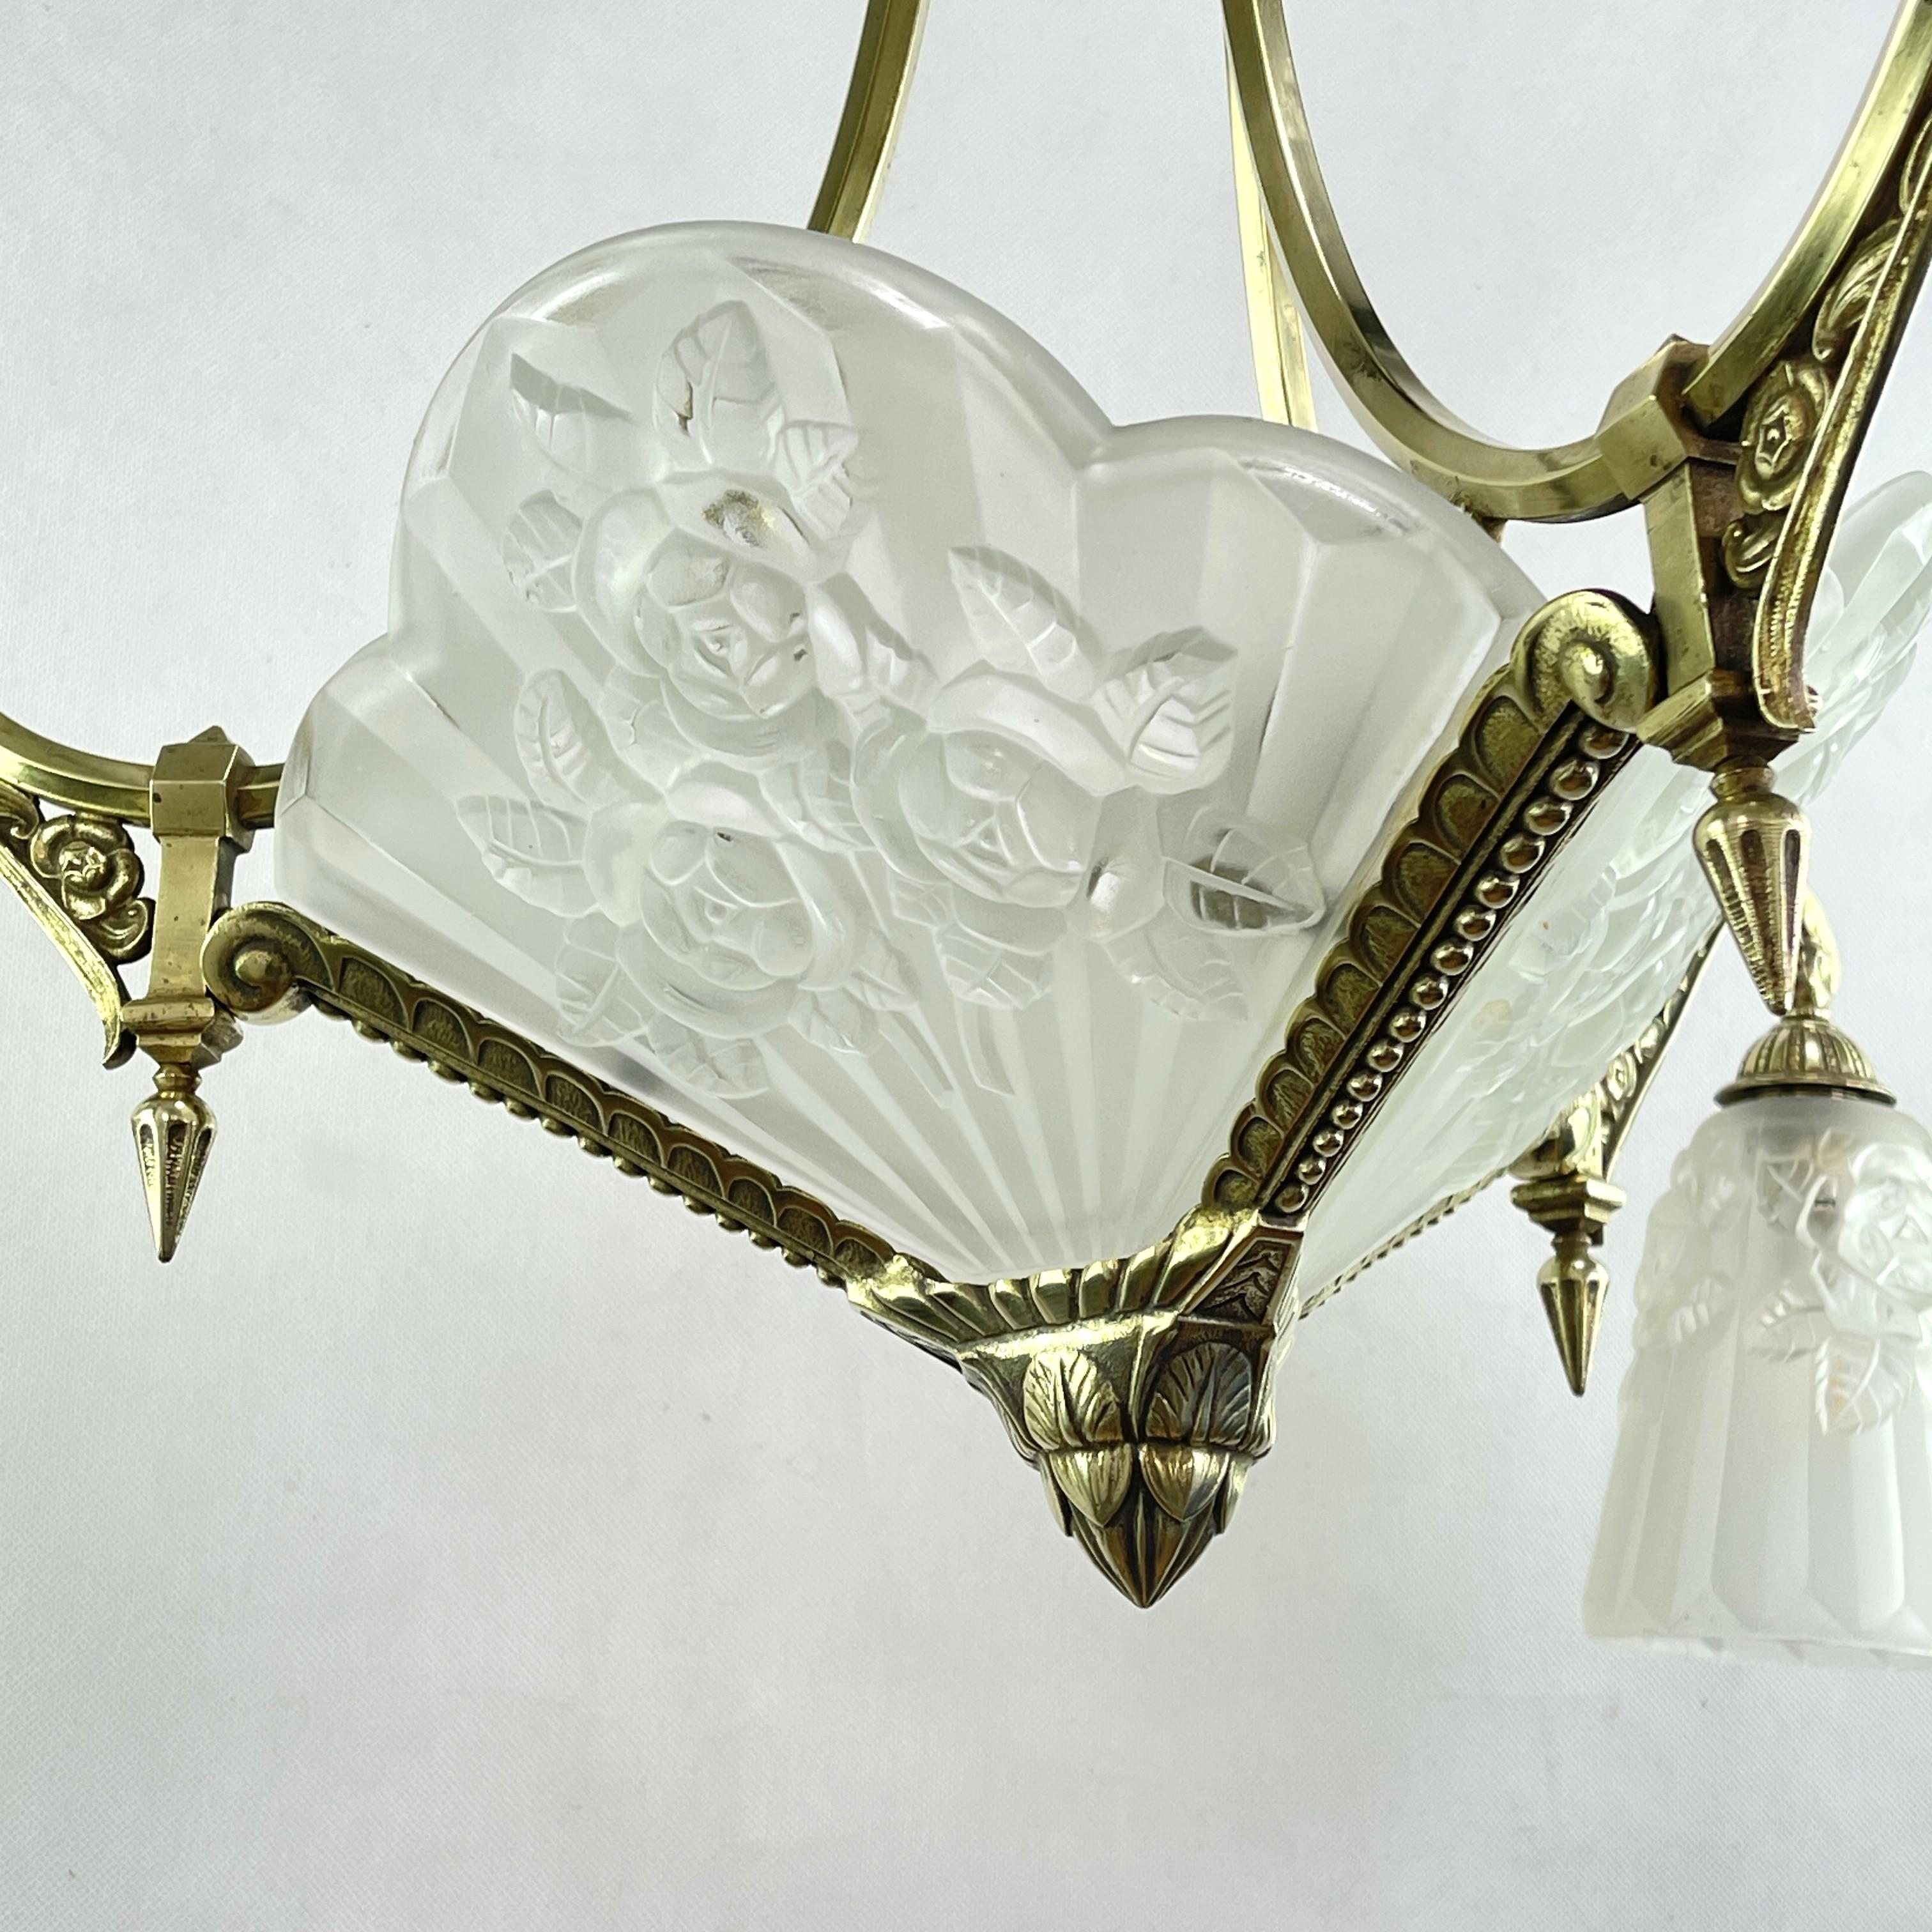 French Art Deco Chandelier Hanging Lamp by P. Gilles Paris, 1930s